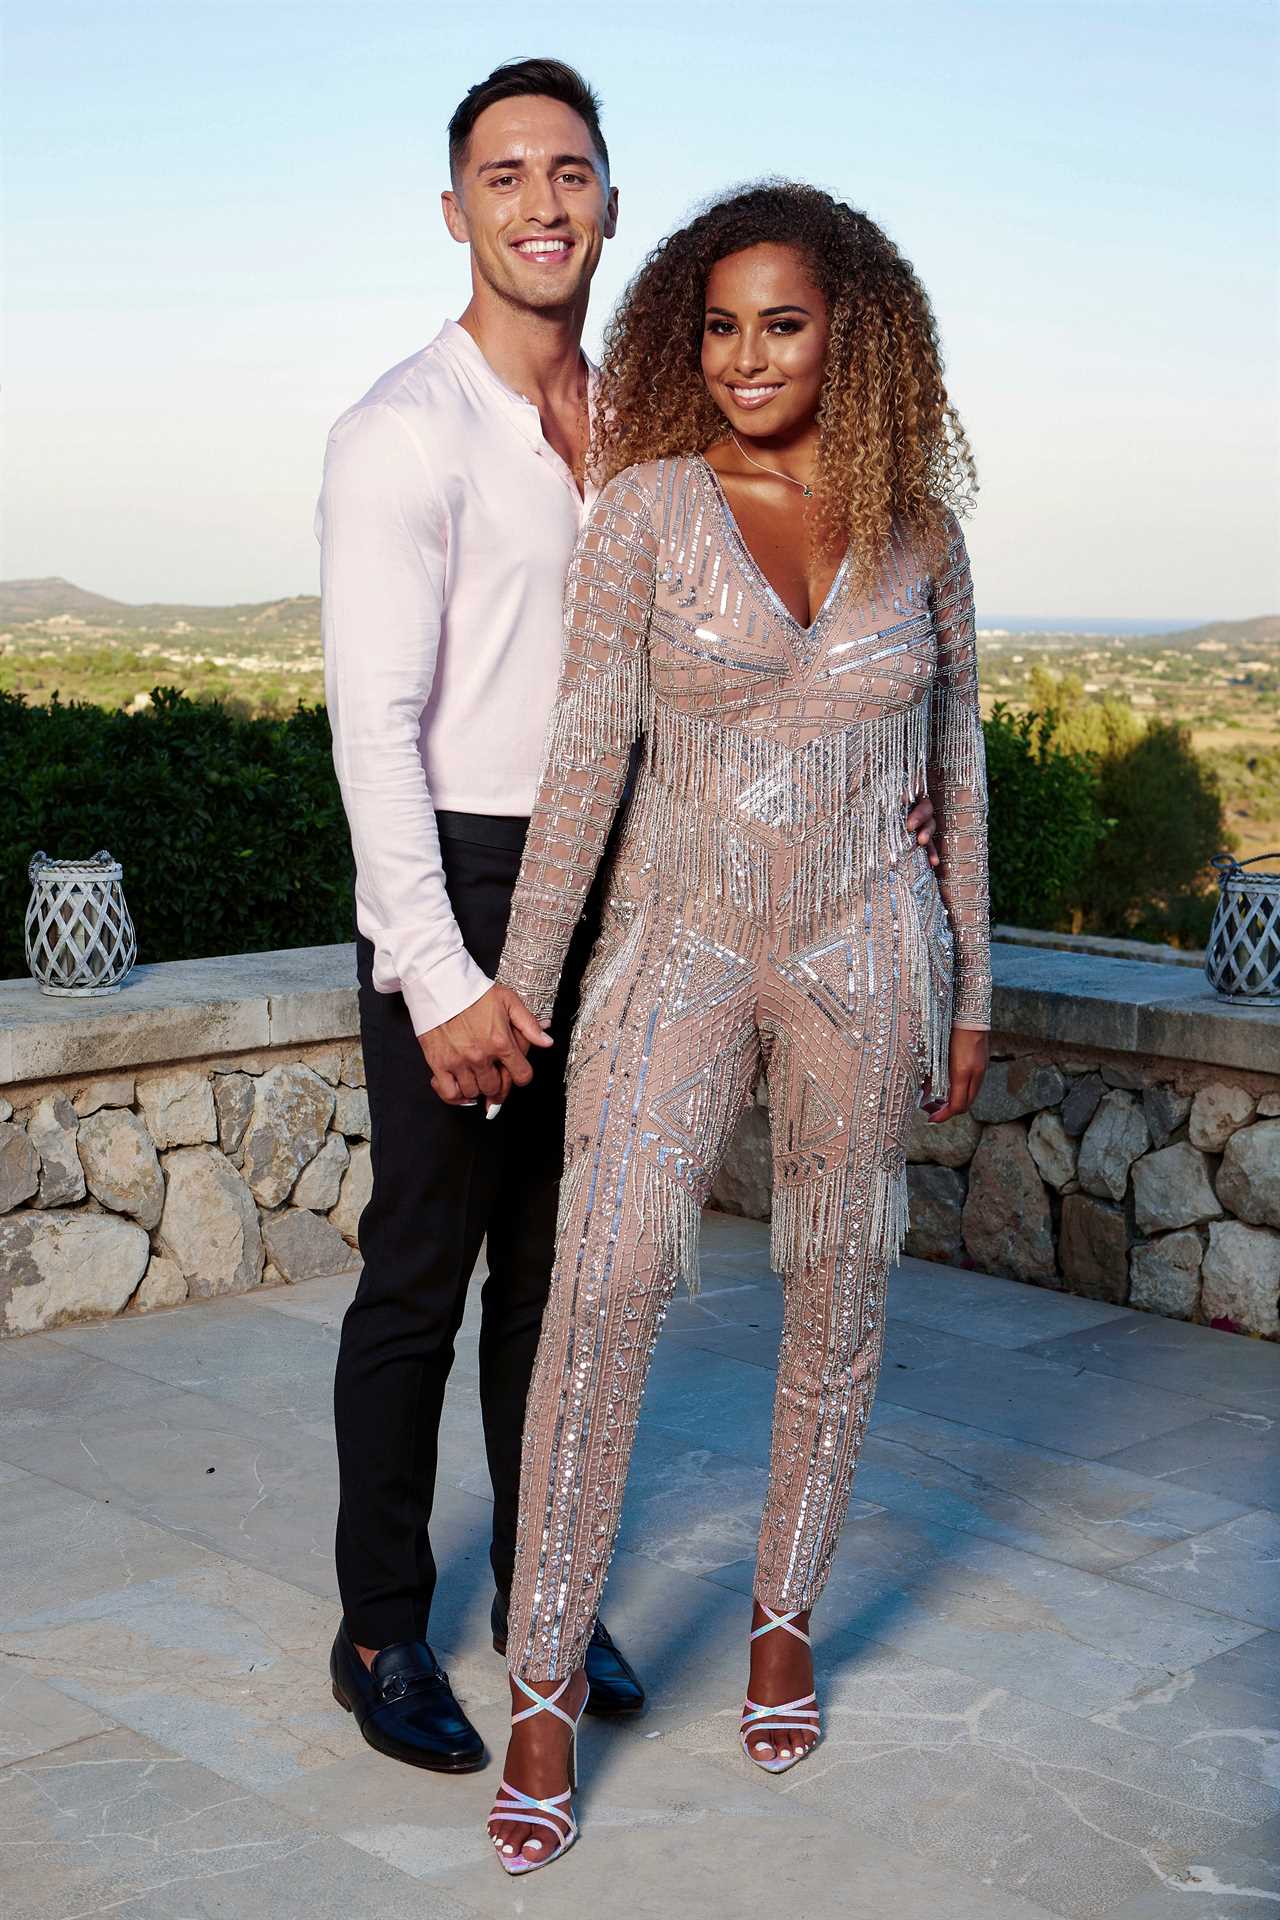 Love Island’s Amber Gill reveals ex Greg O’Shea still hasn’t apologised for cruel text and she hasn’t heard from him since